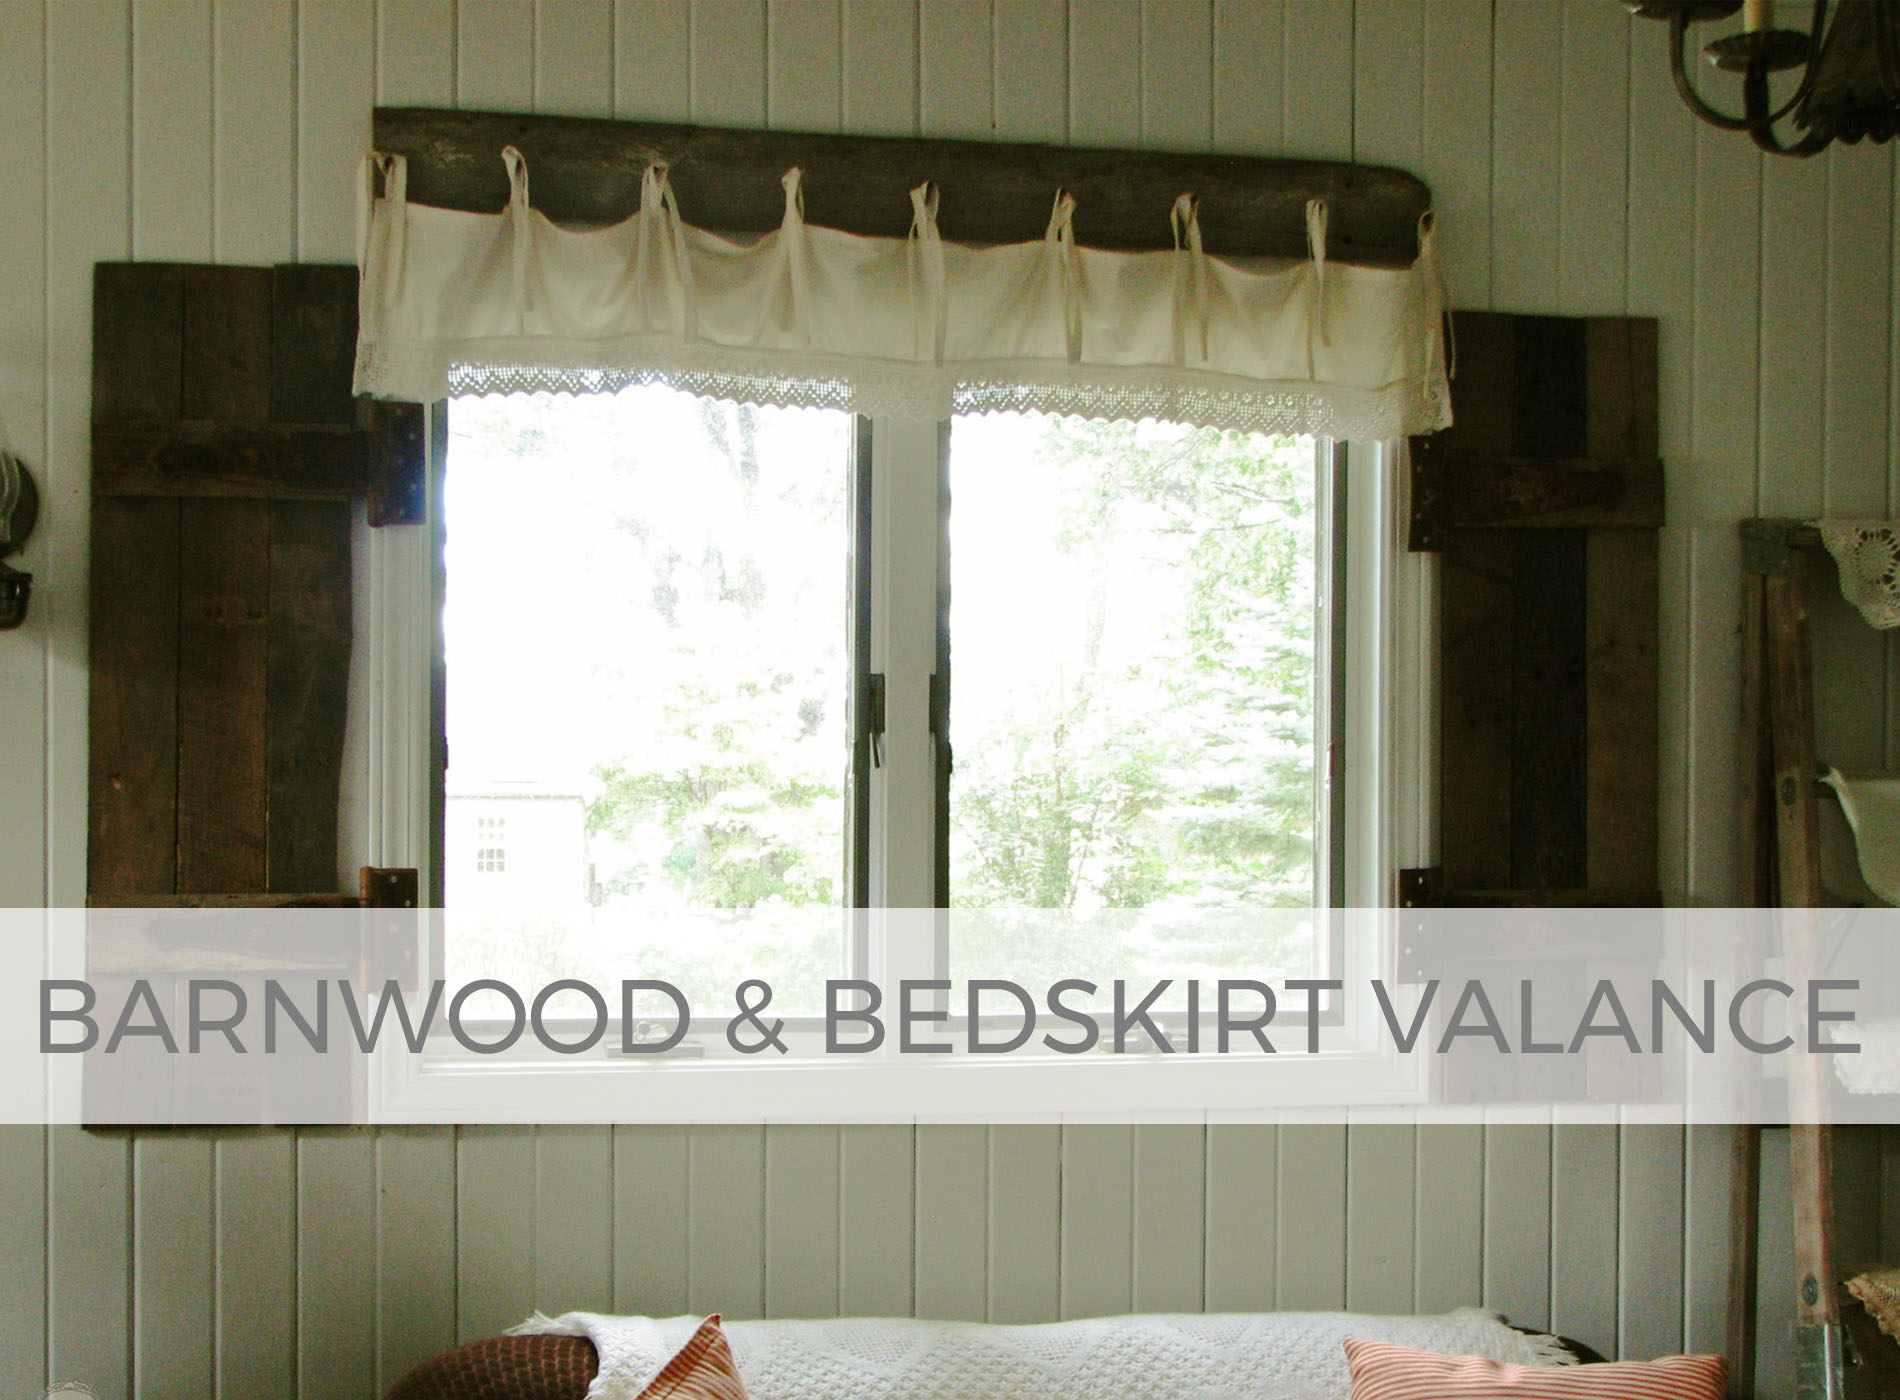 Rustic farmhouse barnwood and bedskirt valance by Larissa of Prodigal Pieces | prodigalpieces.com